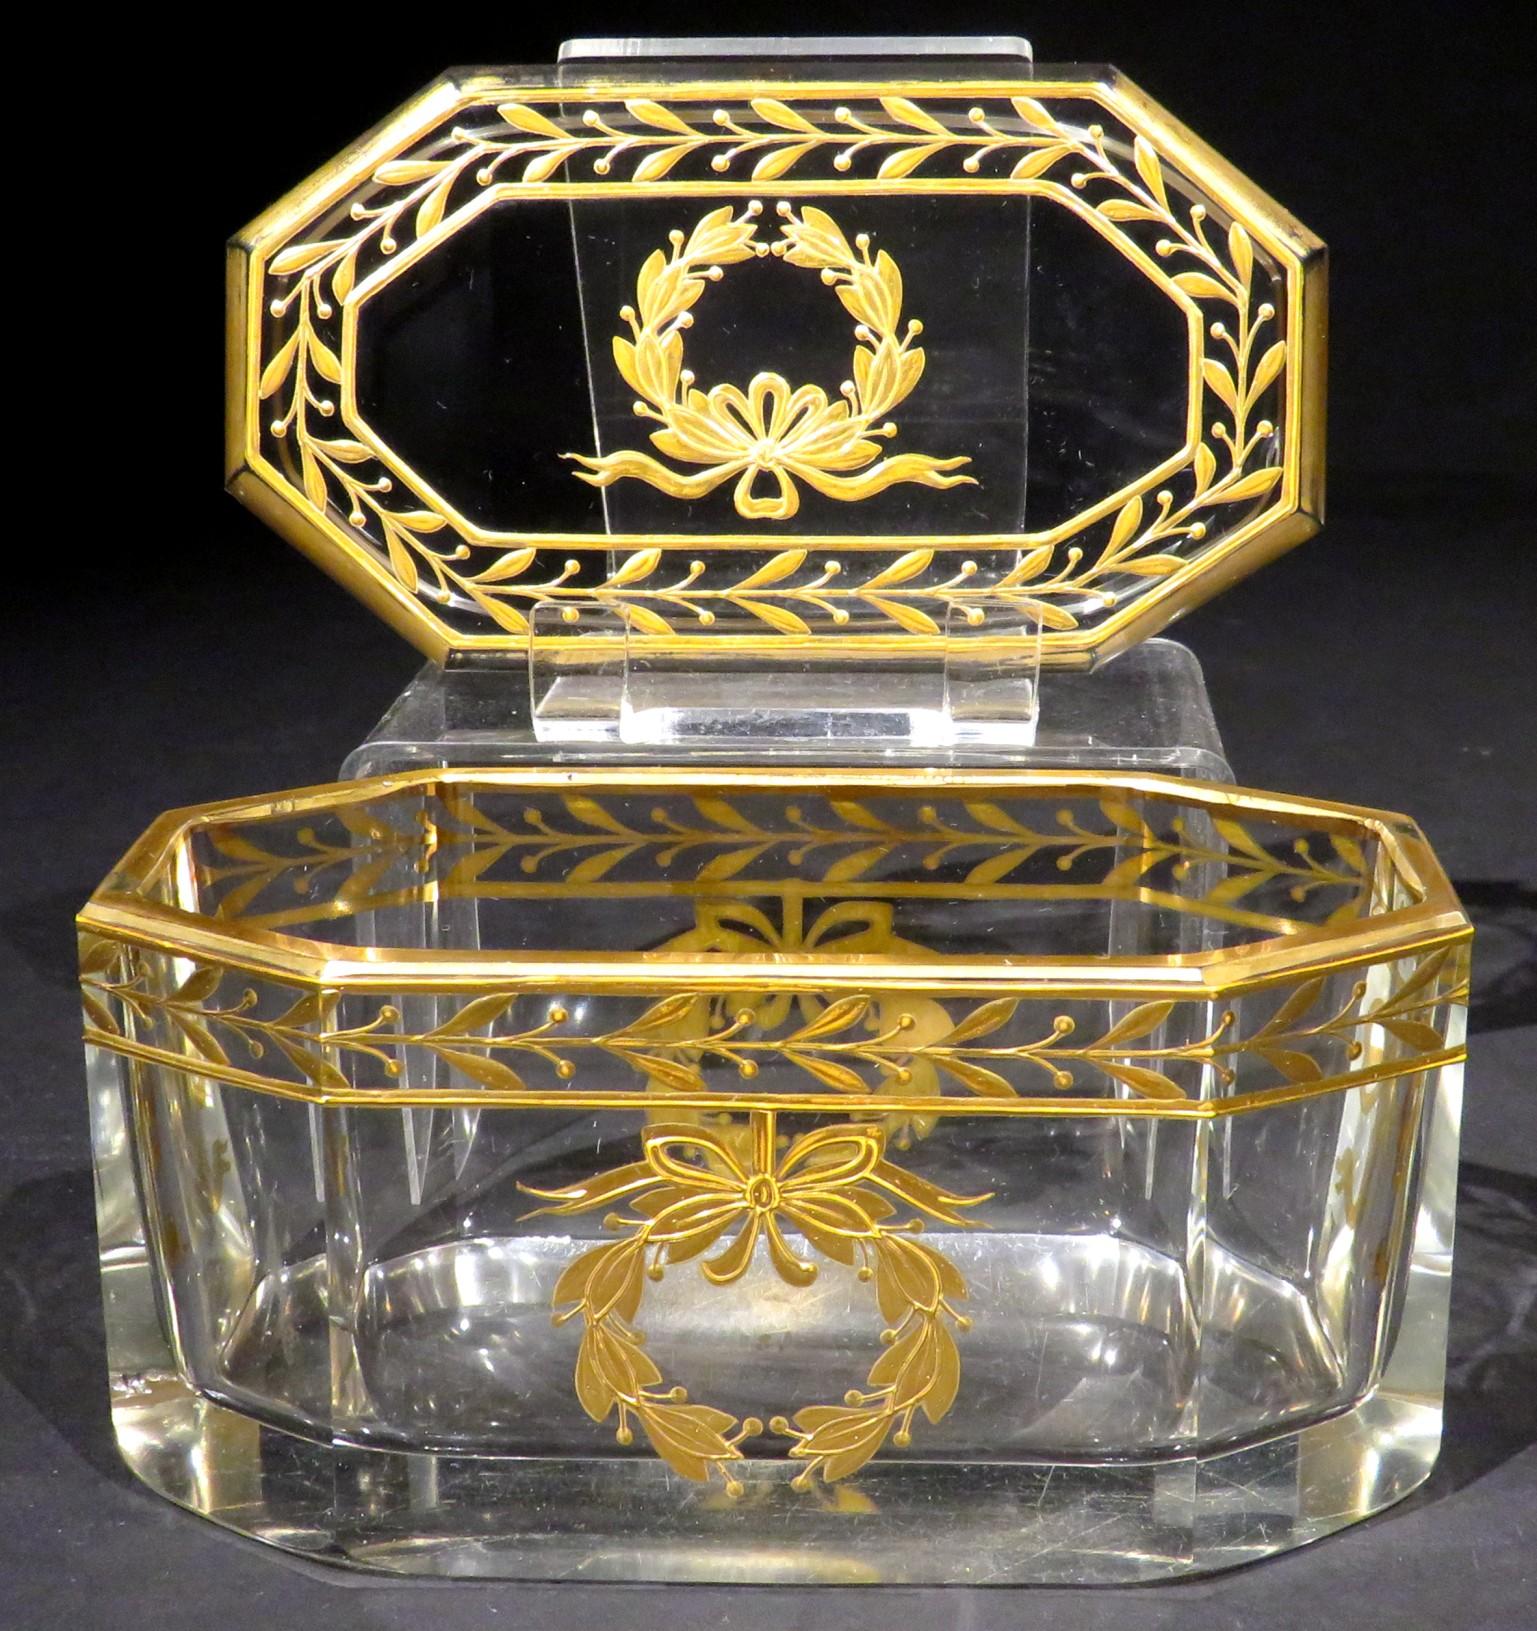 Large Early 20th Century Gilt Decorated Glass Dresser Jar or Box, Circa 1920 In Good Condition For Sale In Ottawa, Ontario